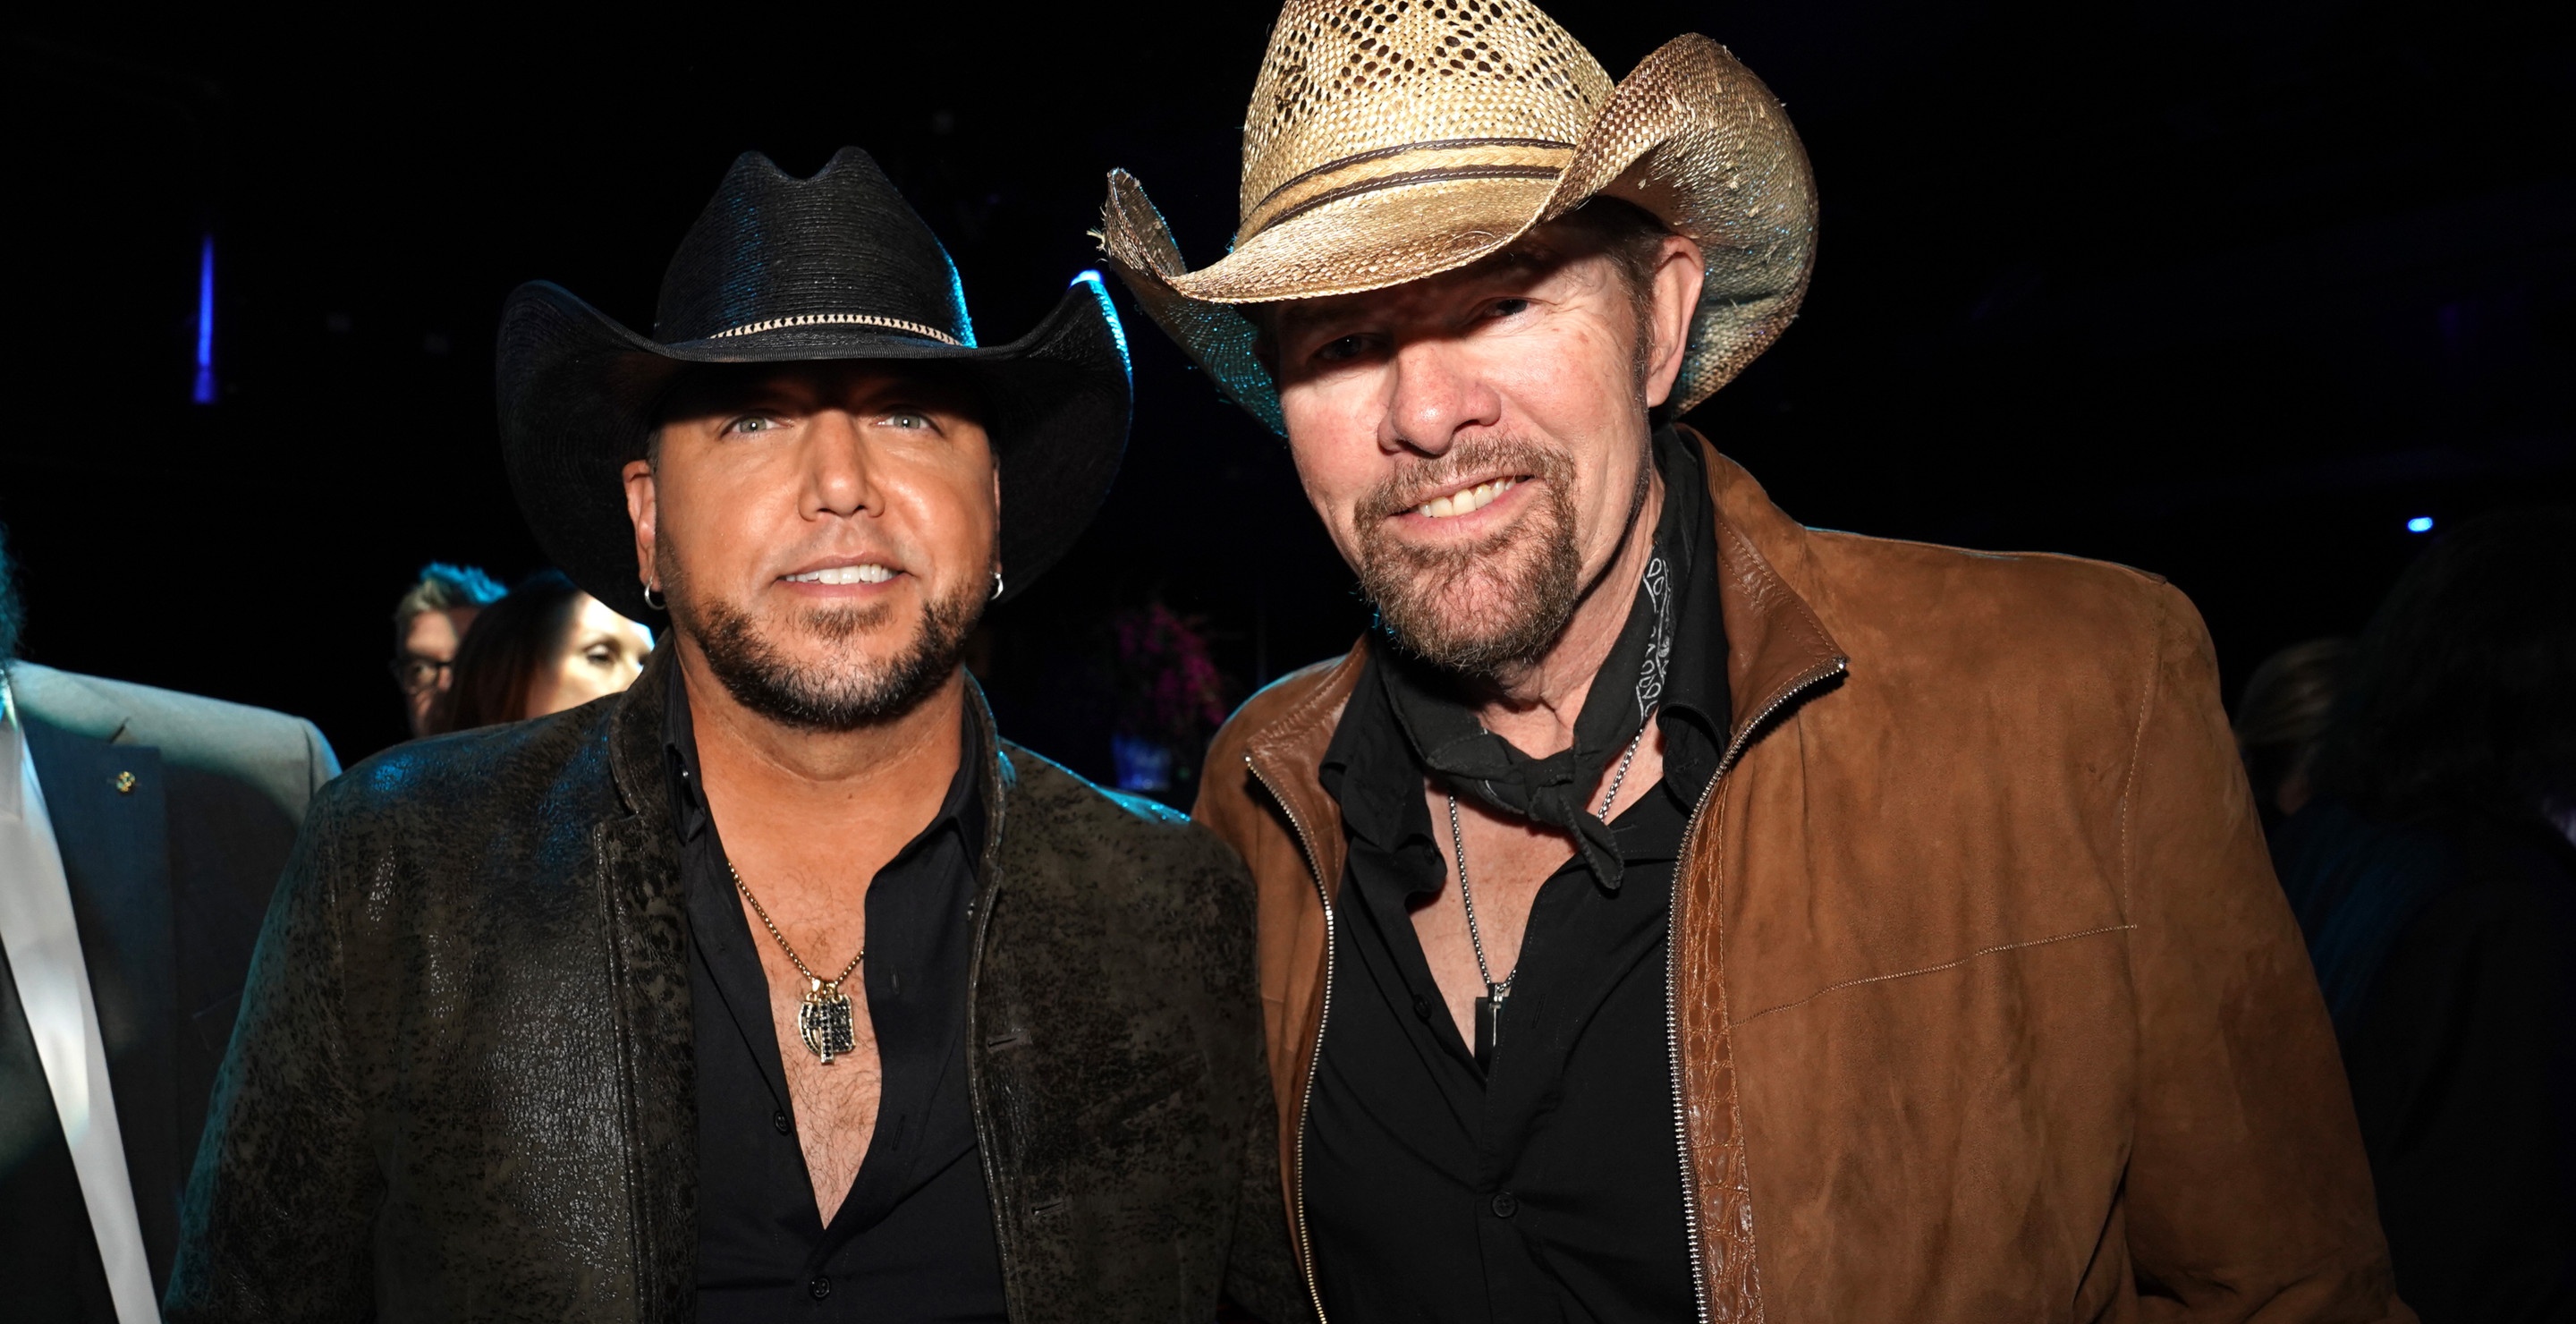 Jason Aldean Will Honor Toby Keith At ACM Awards